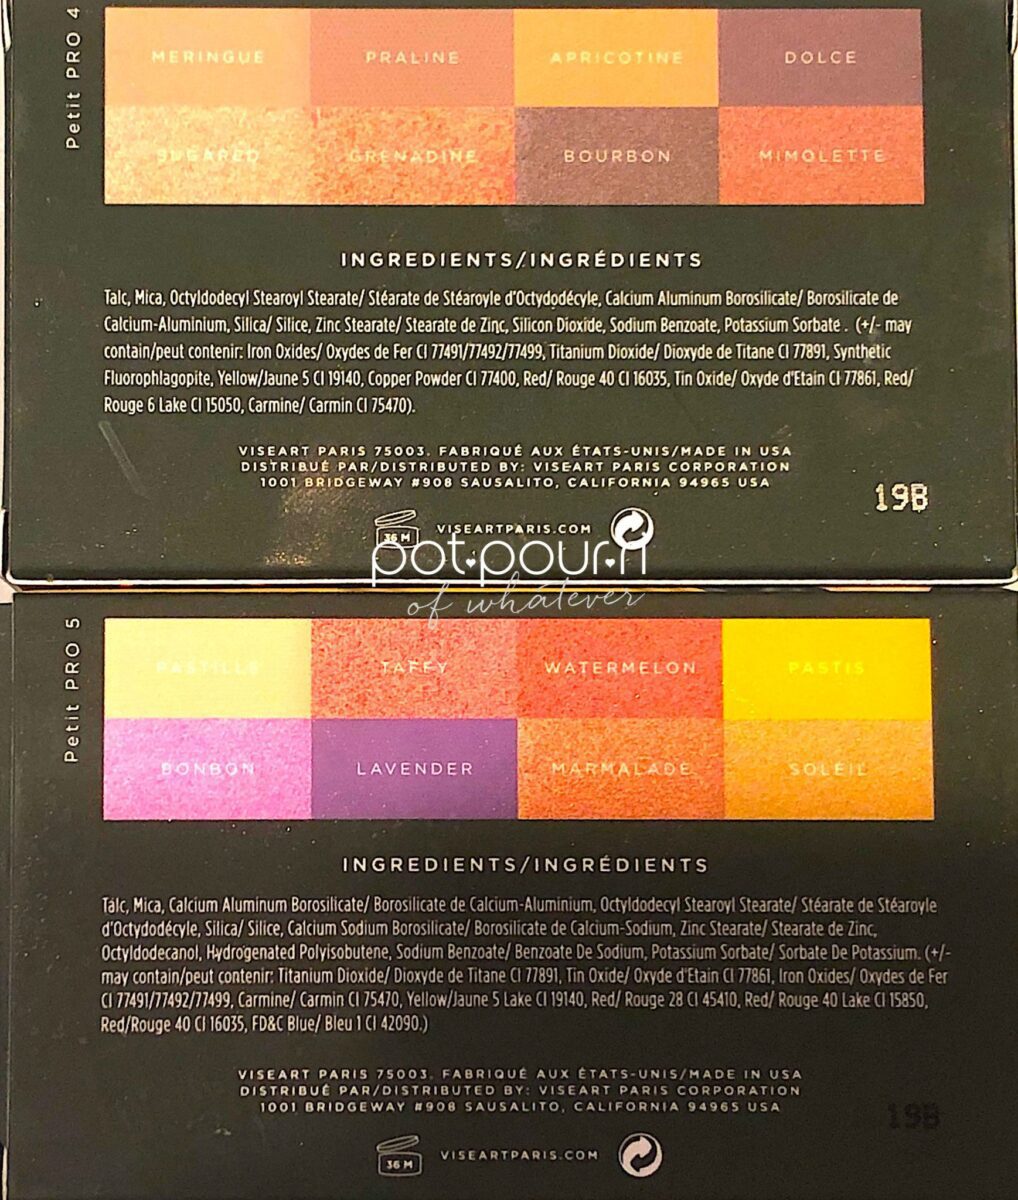 THE INGREDIENTS FOR THE VISEART PETIT PRO PALETTES APRICOTINE AND SOLEIL